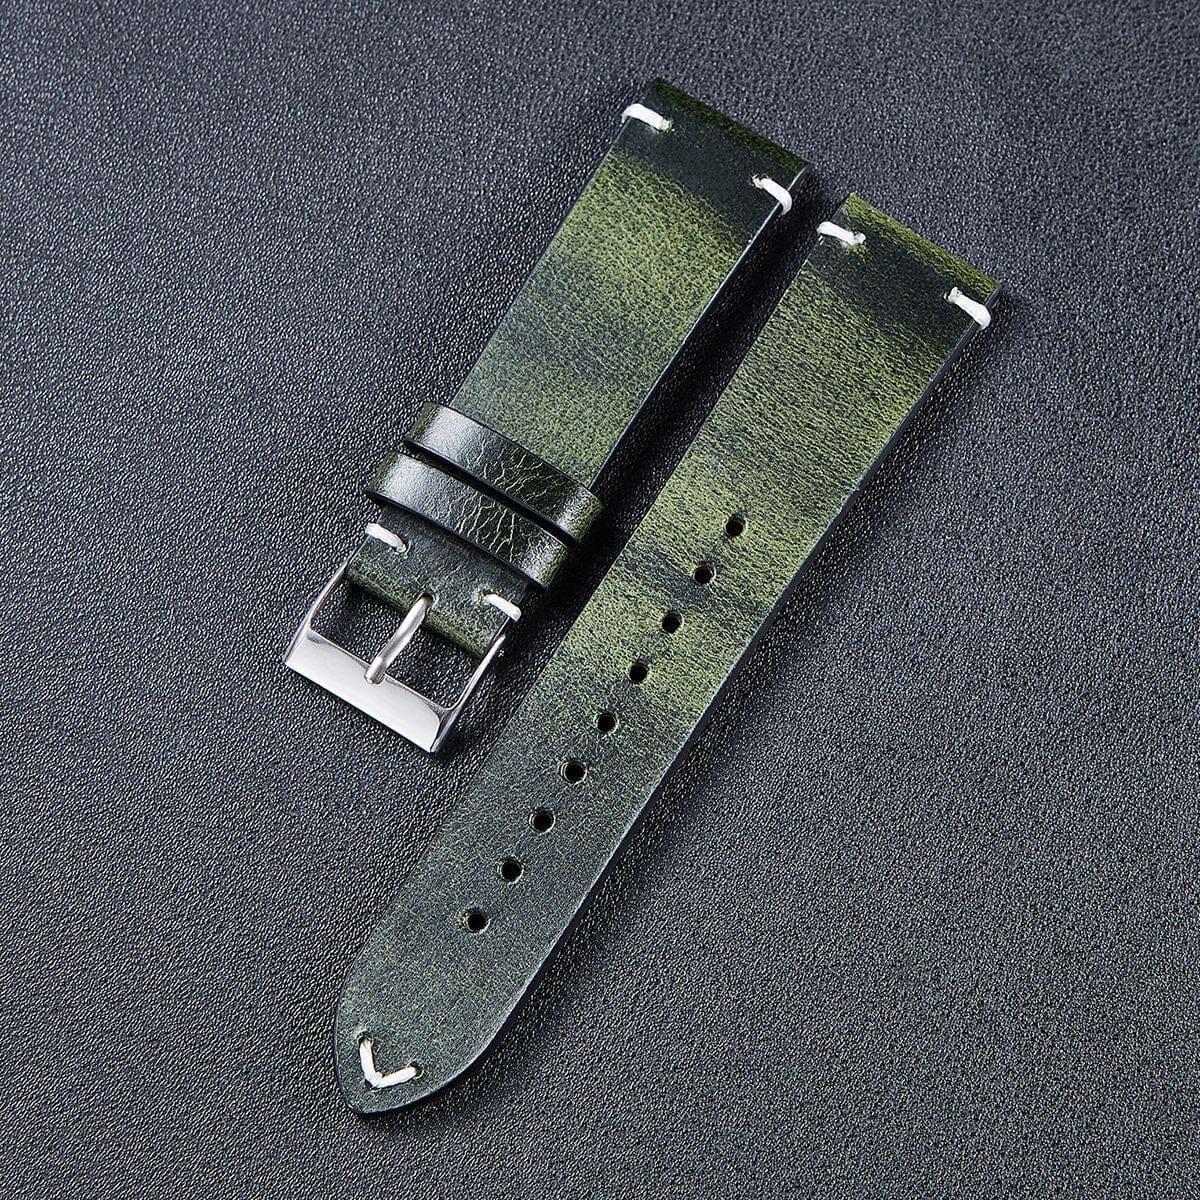 Vintage Oiled Leather Watch Straps Compatible with the Garmin Tactix 7